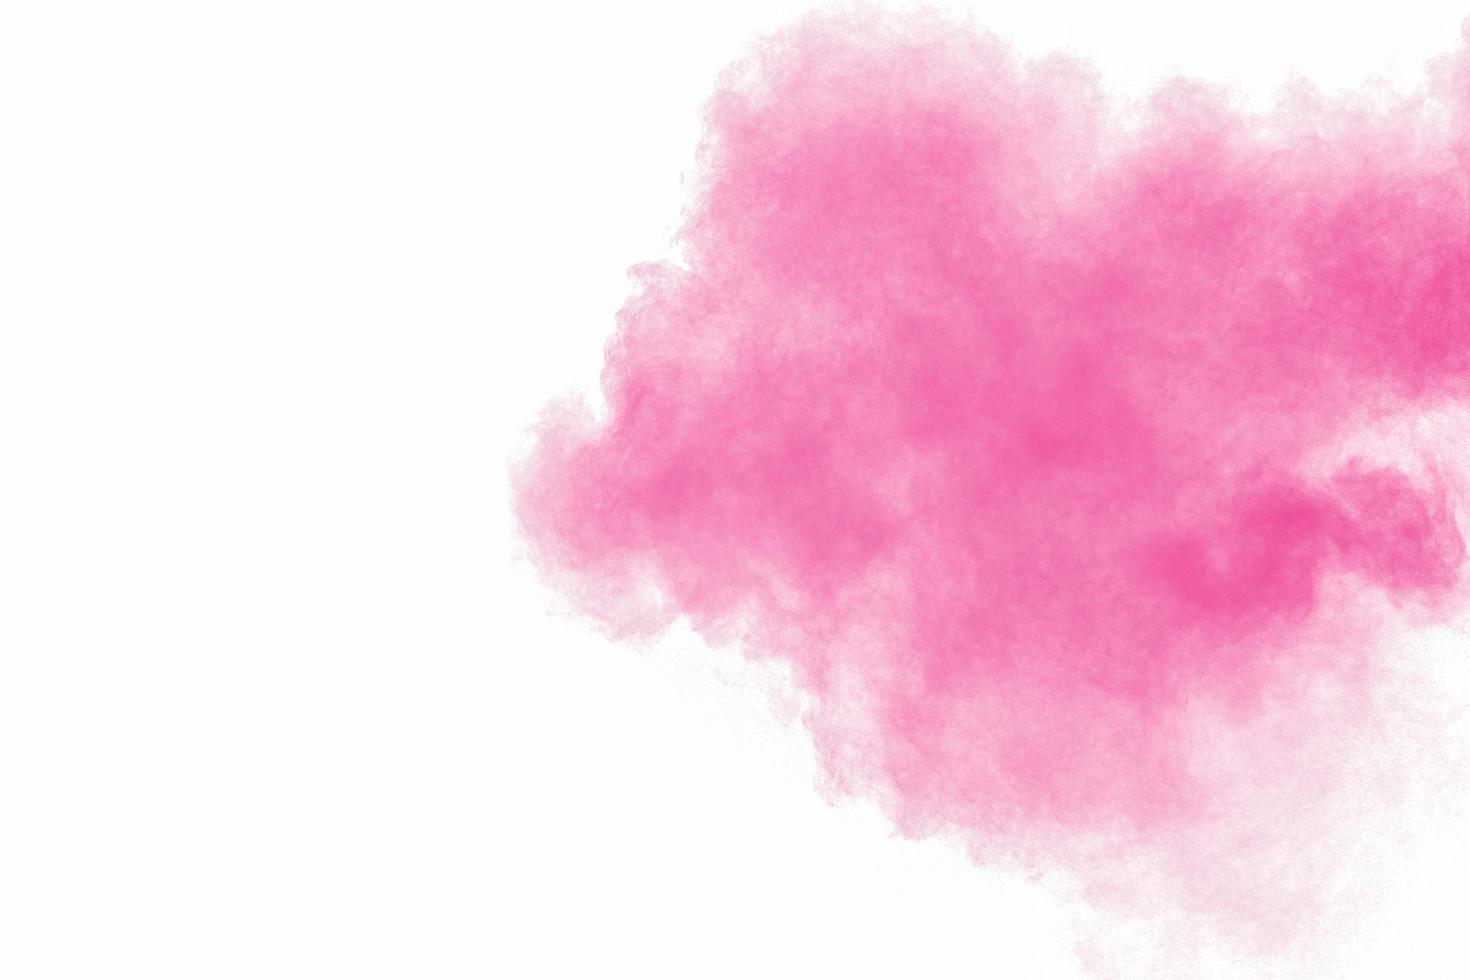 Abstract pink powder explosion on white background. Freeze motion of pink dust splattered. photo